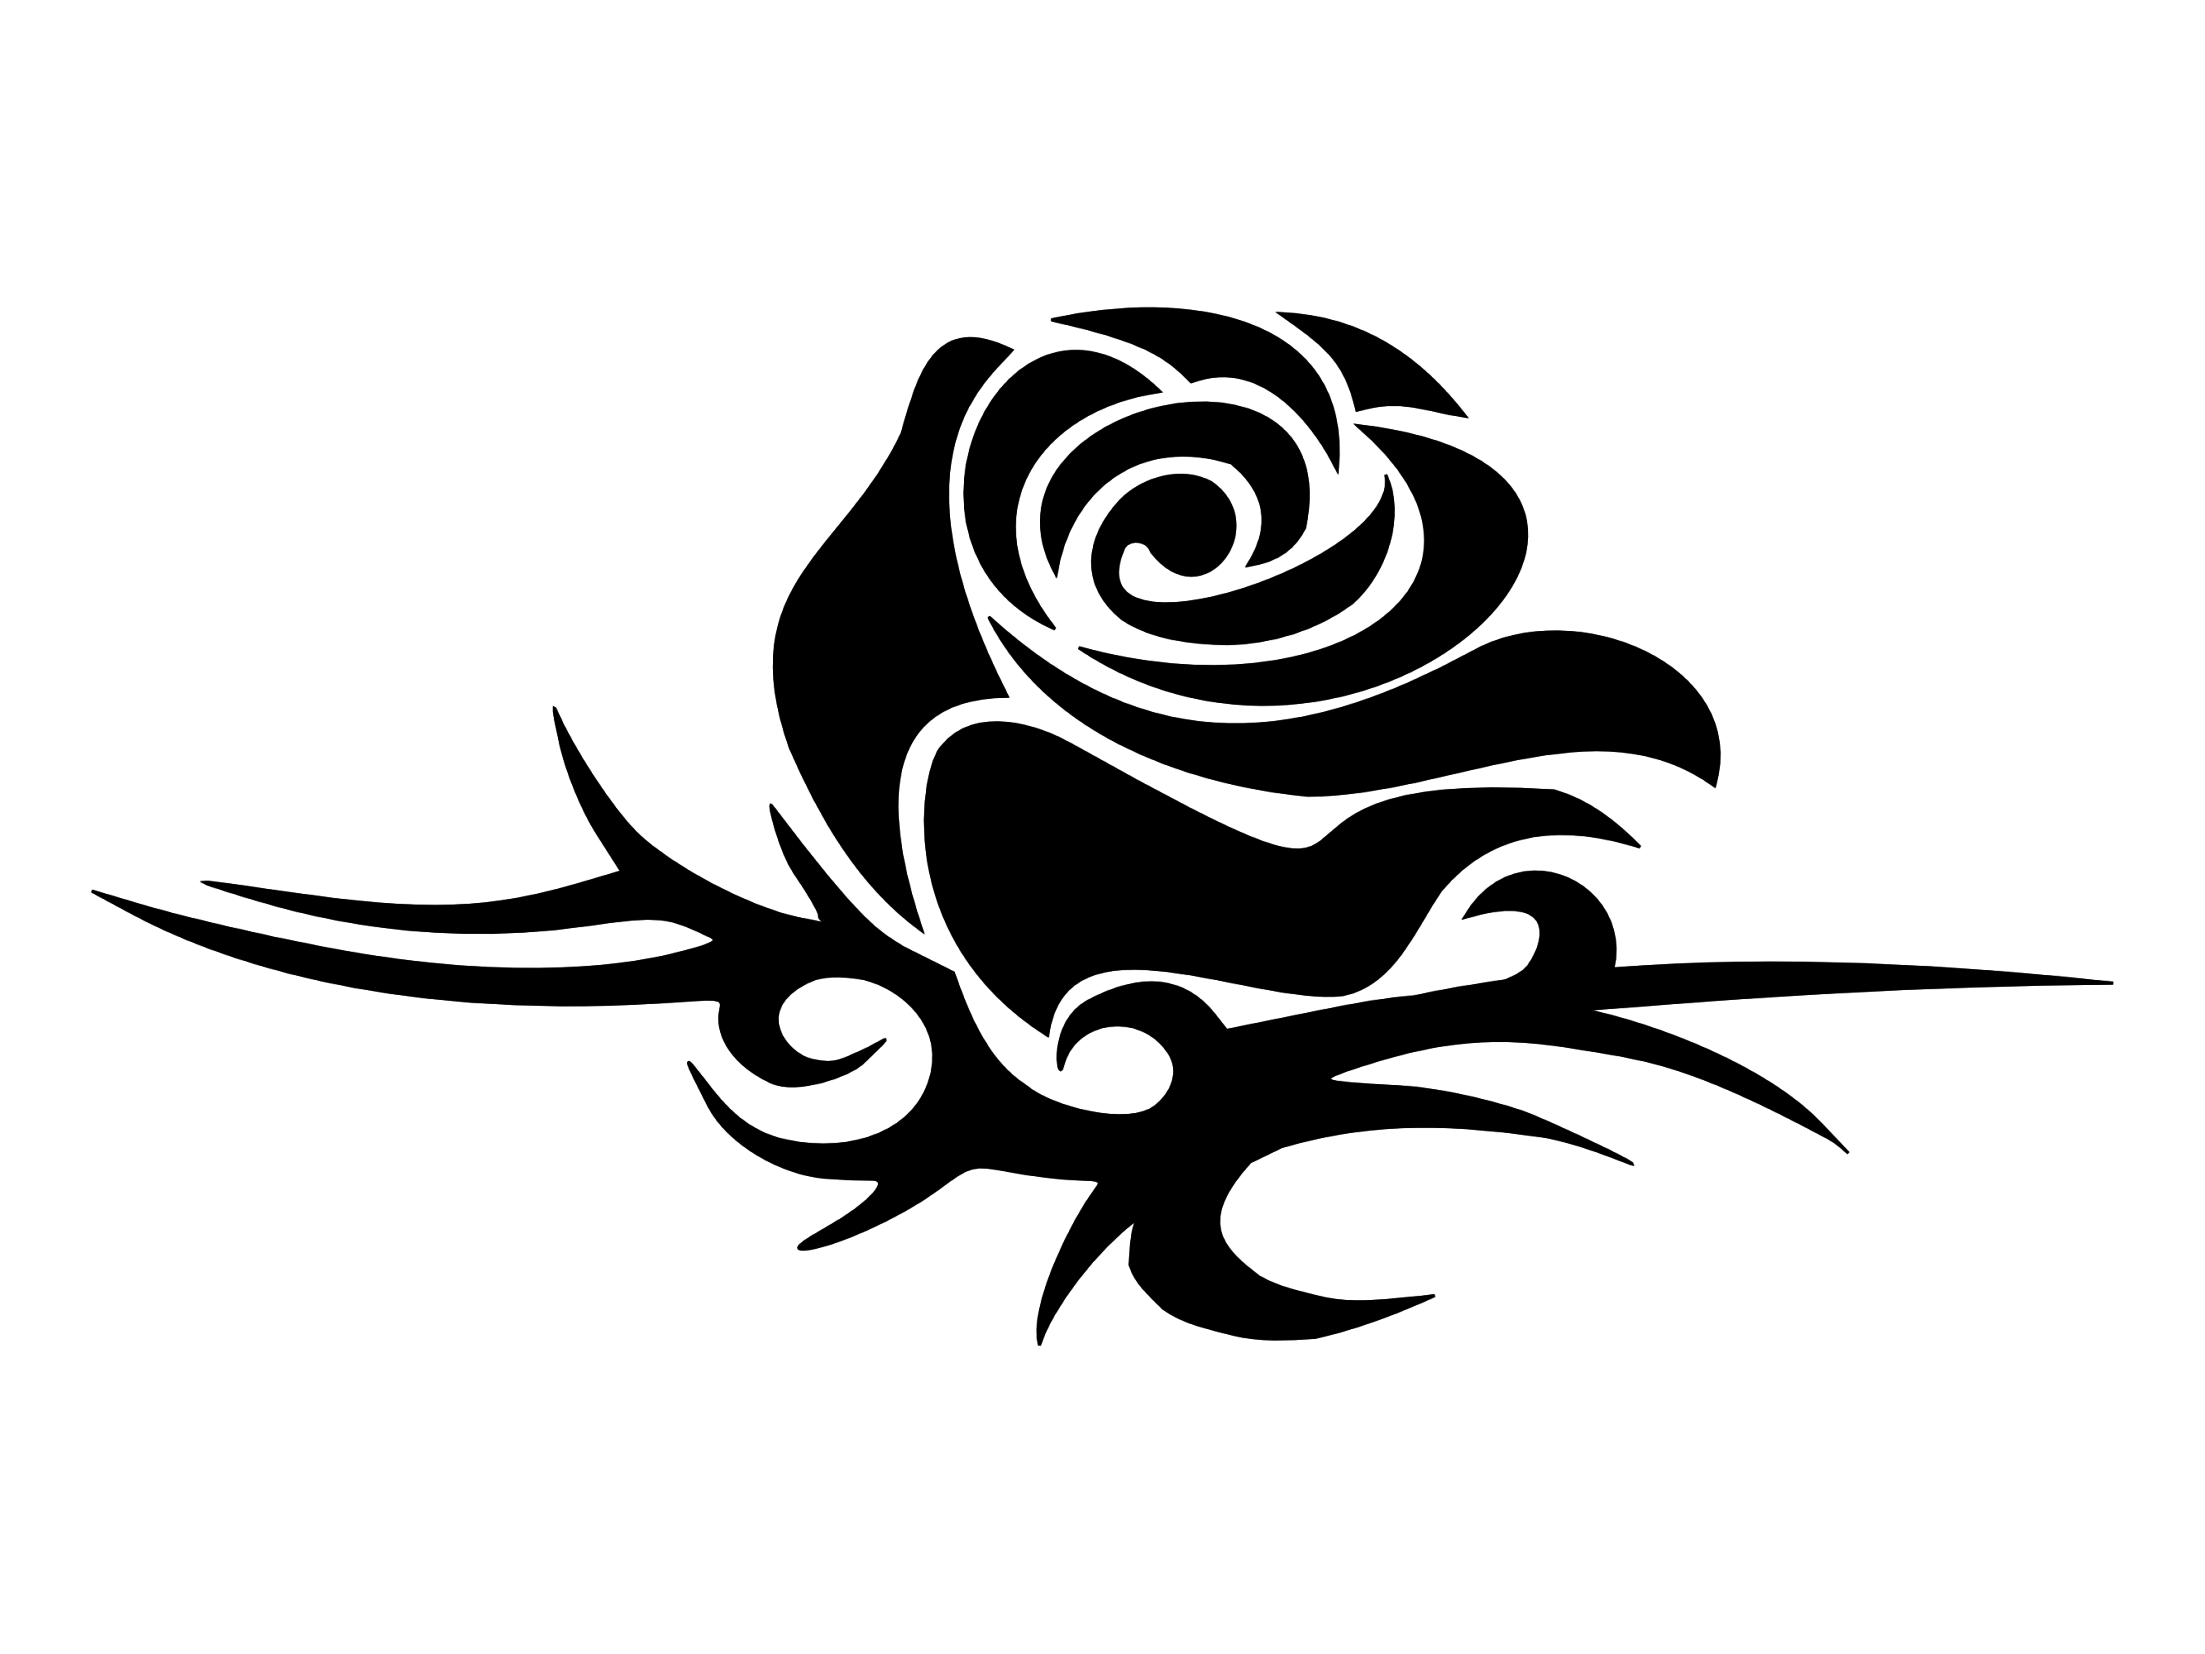 5. Minimalist Rose Tattoo Placement Options - wide 9